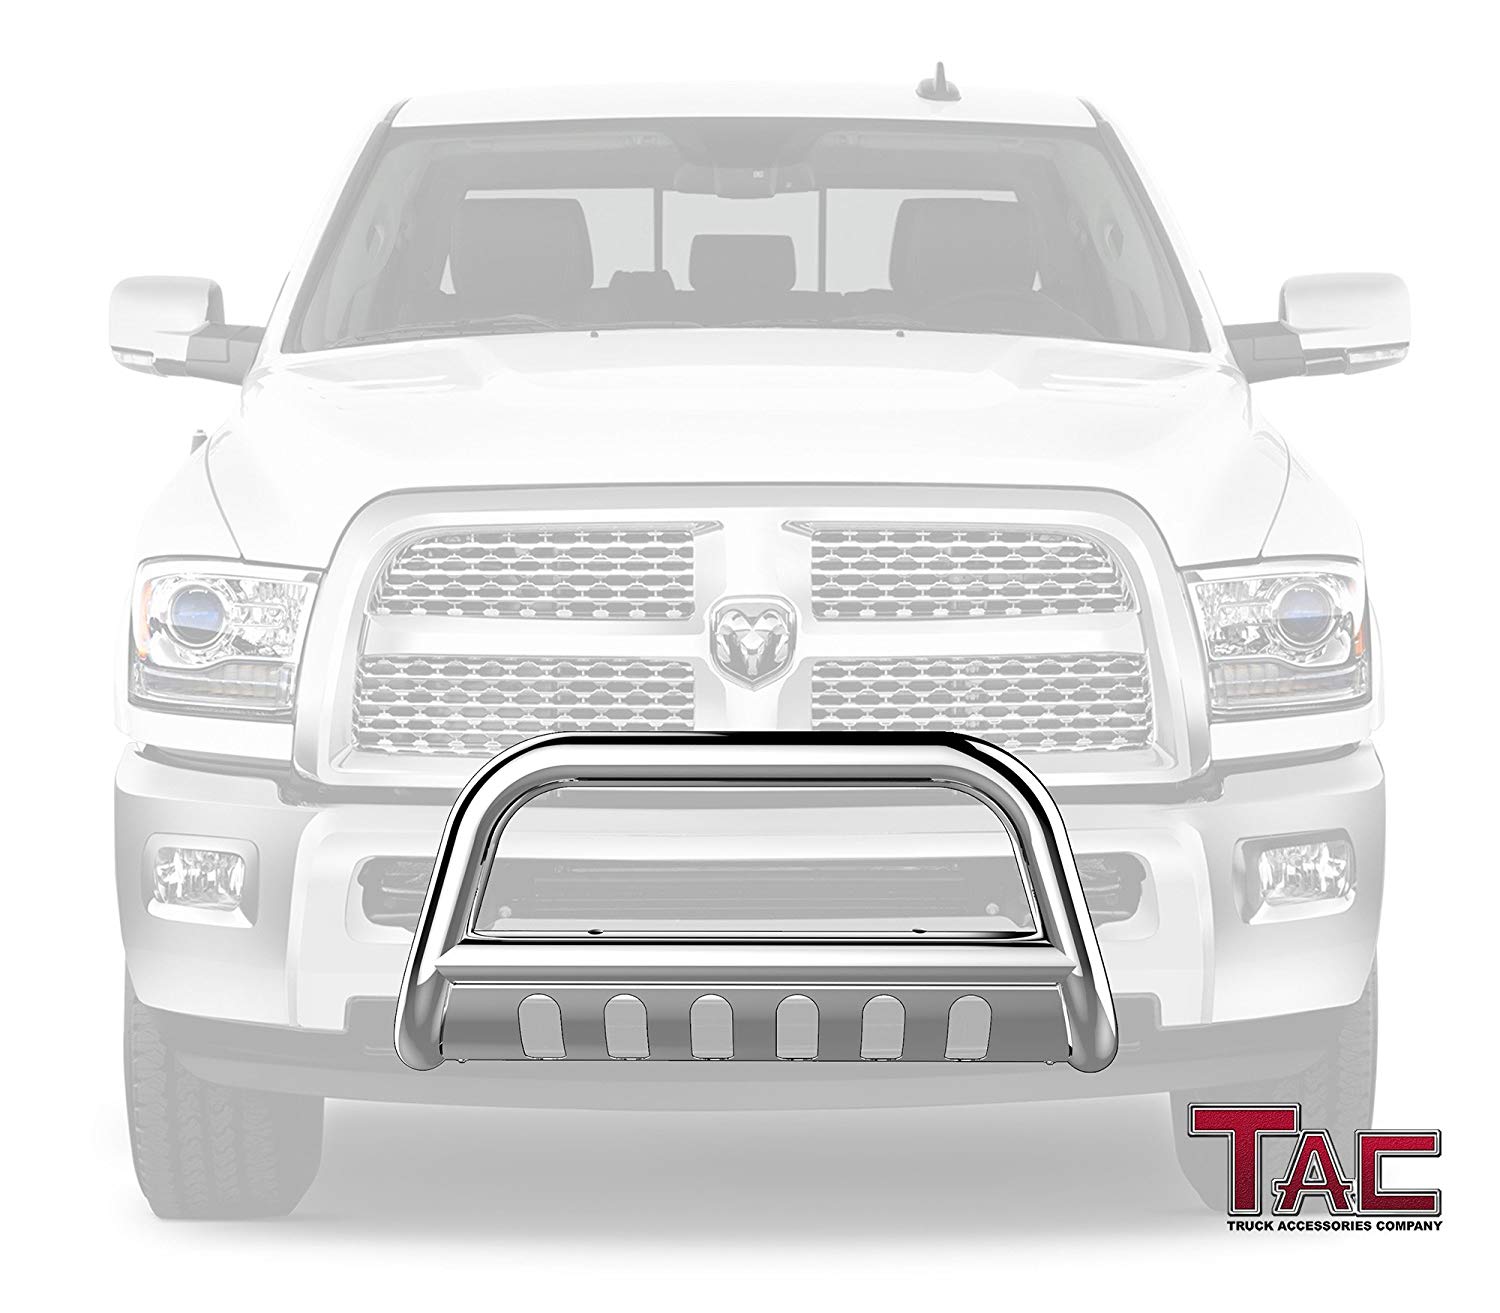 TAC Stainless Steel 3" Bull Bar For 2010-2018 Dodge RAM 2500/3500 Truck Front Bumper Brush Grille Guard Nudge Bar - 0